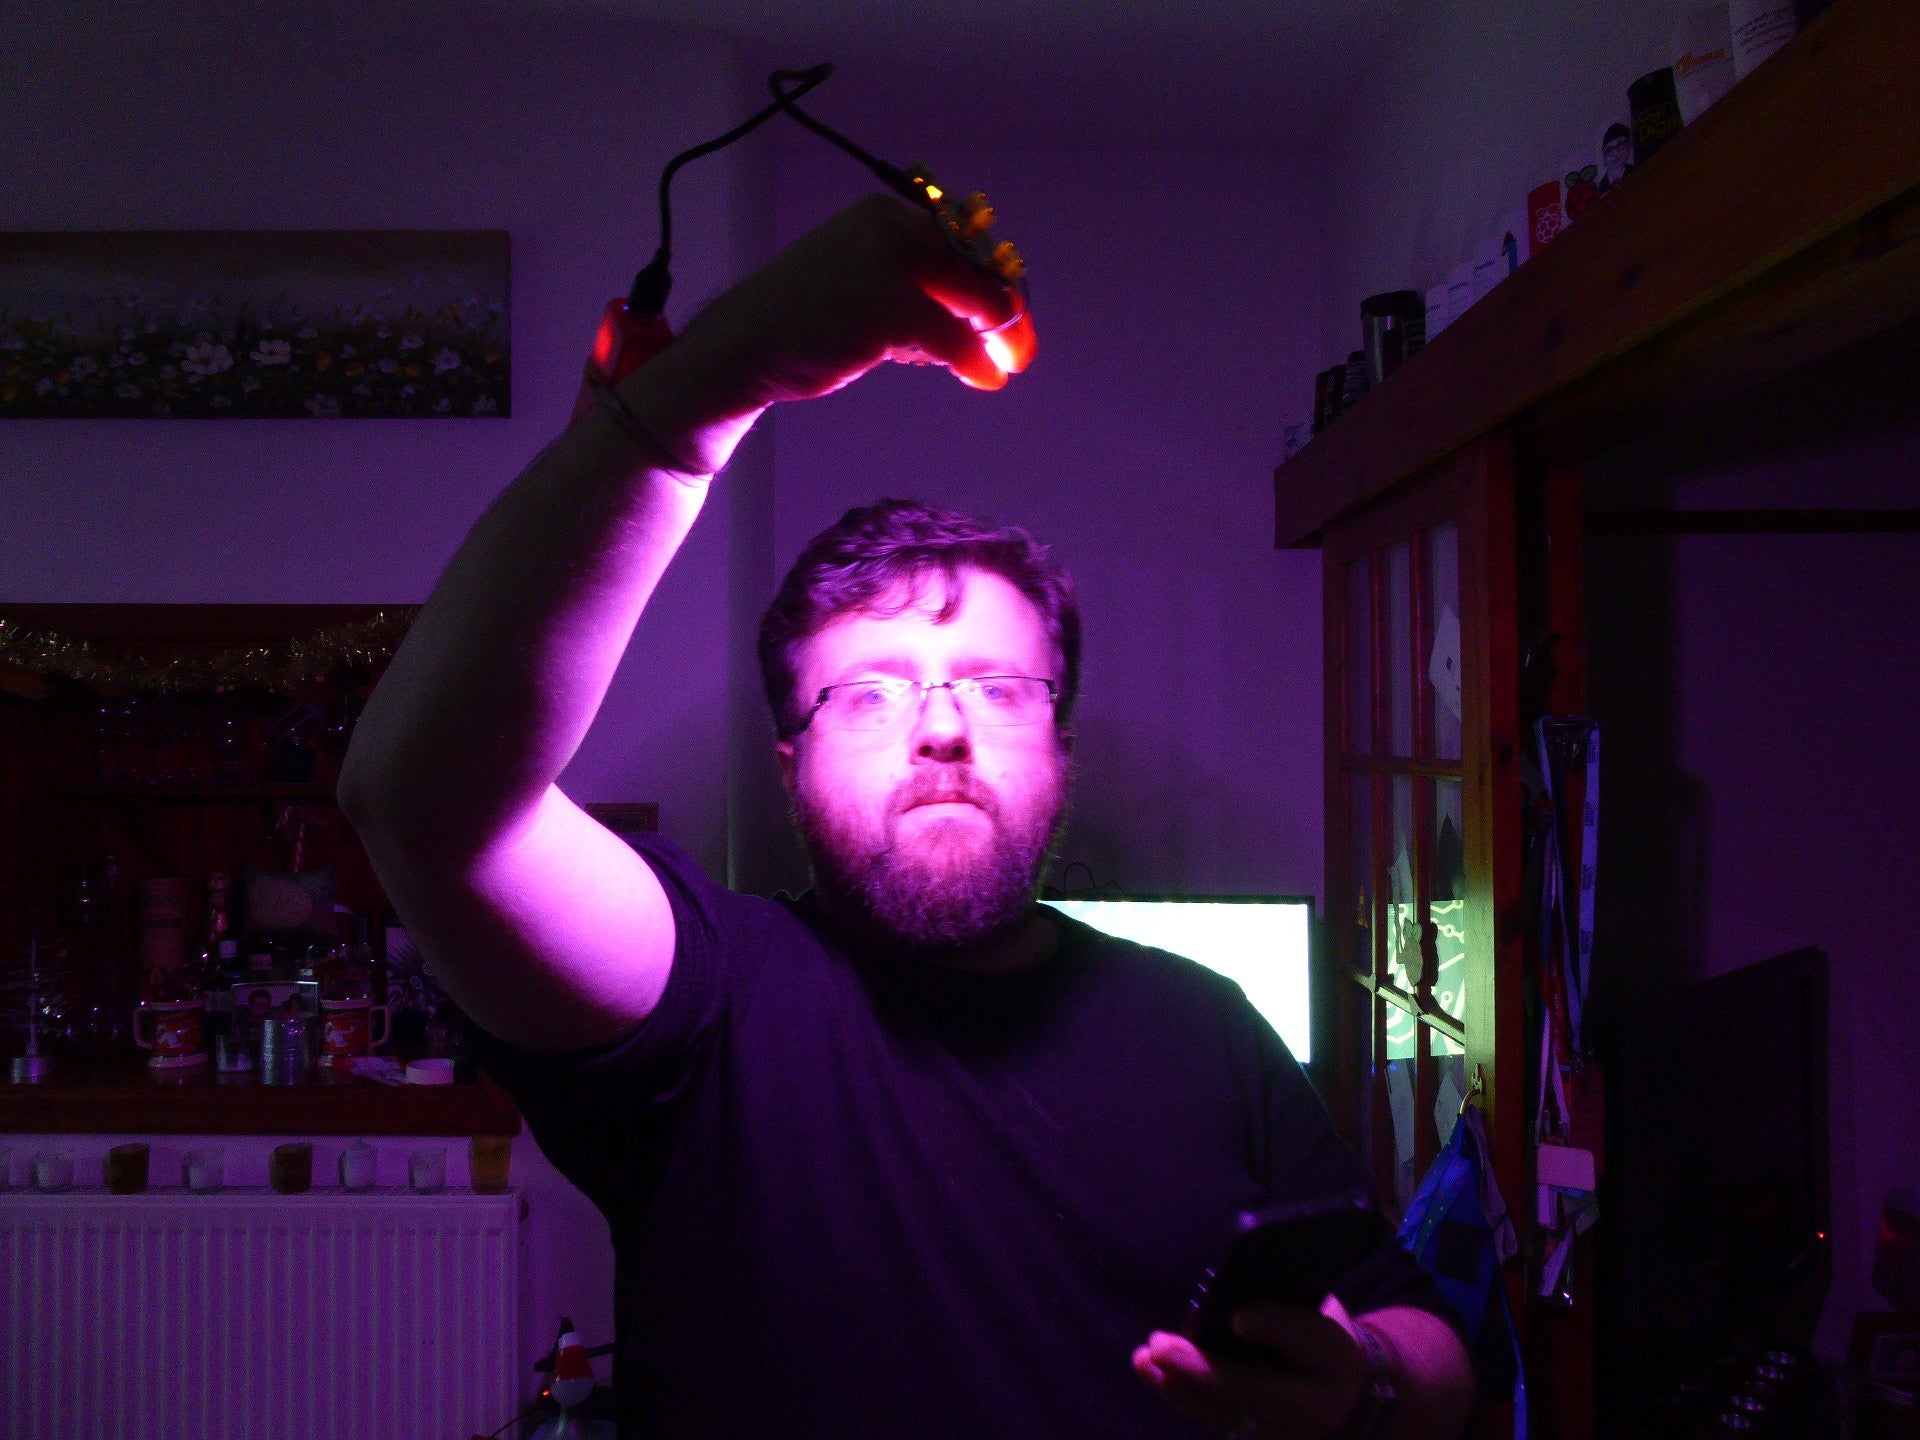 Les, holding a neopixel powered glove light to his face